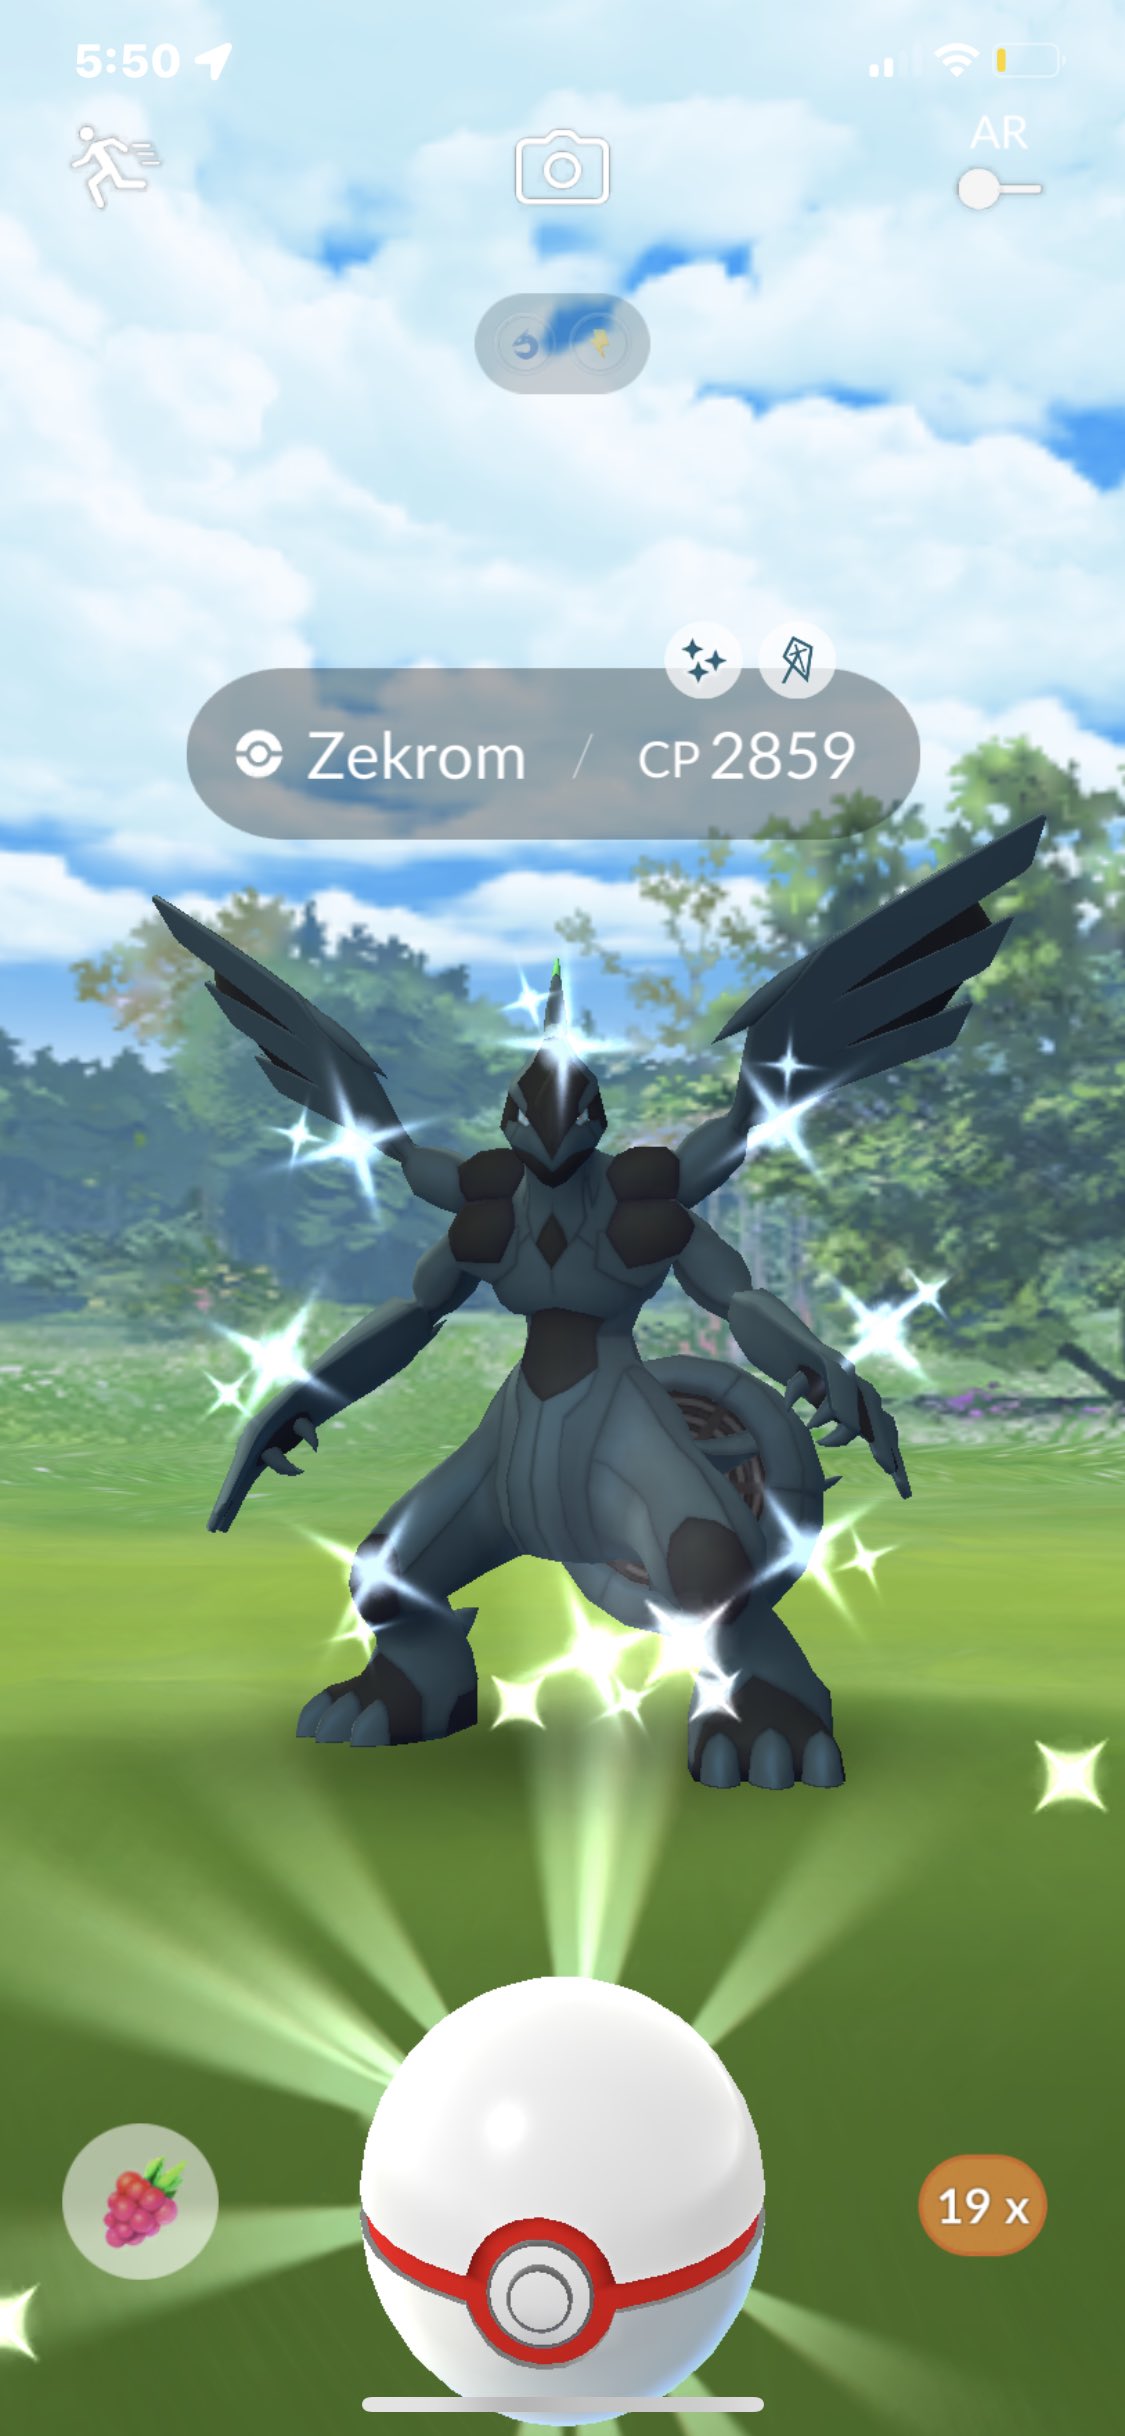 Have they left Zekrom shiny off or am I just unlucky? : r/pokemongo